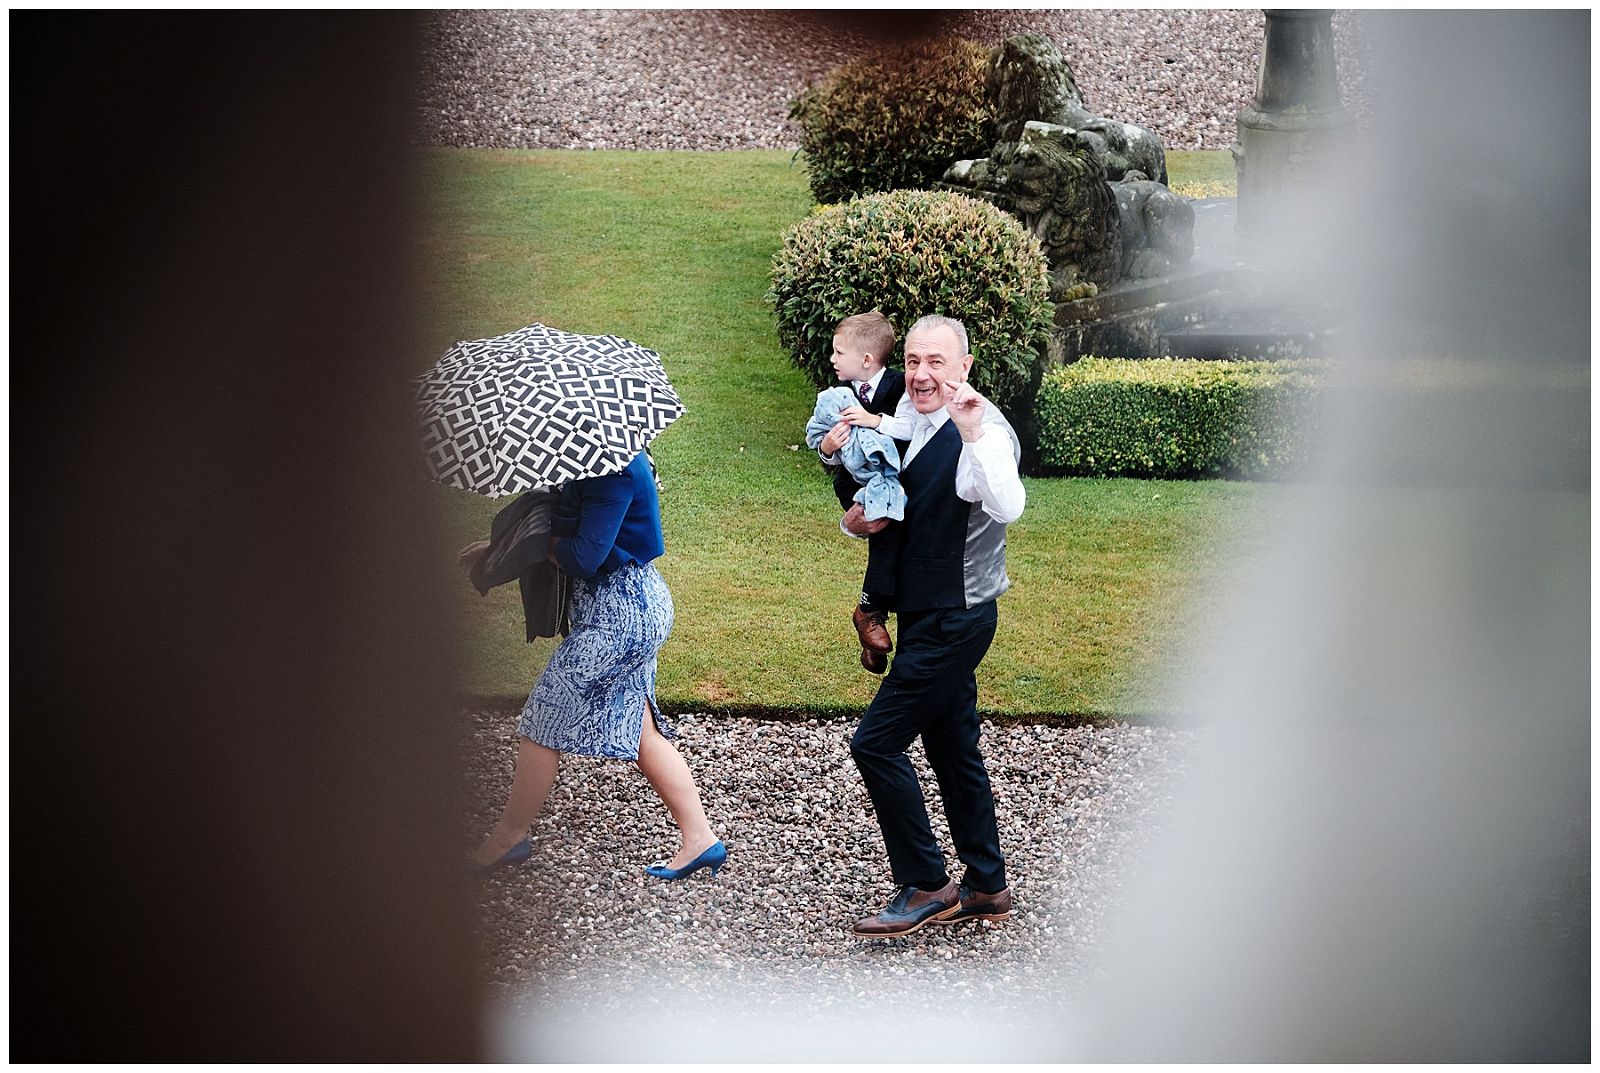 Creative natural photographs that capture the fun of the wedding morning at Hawkstone Hall in Shrewsbury by Documentary Wedding Photographer Stuart James